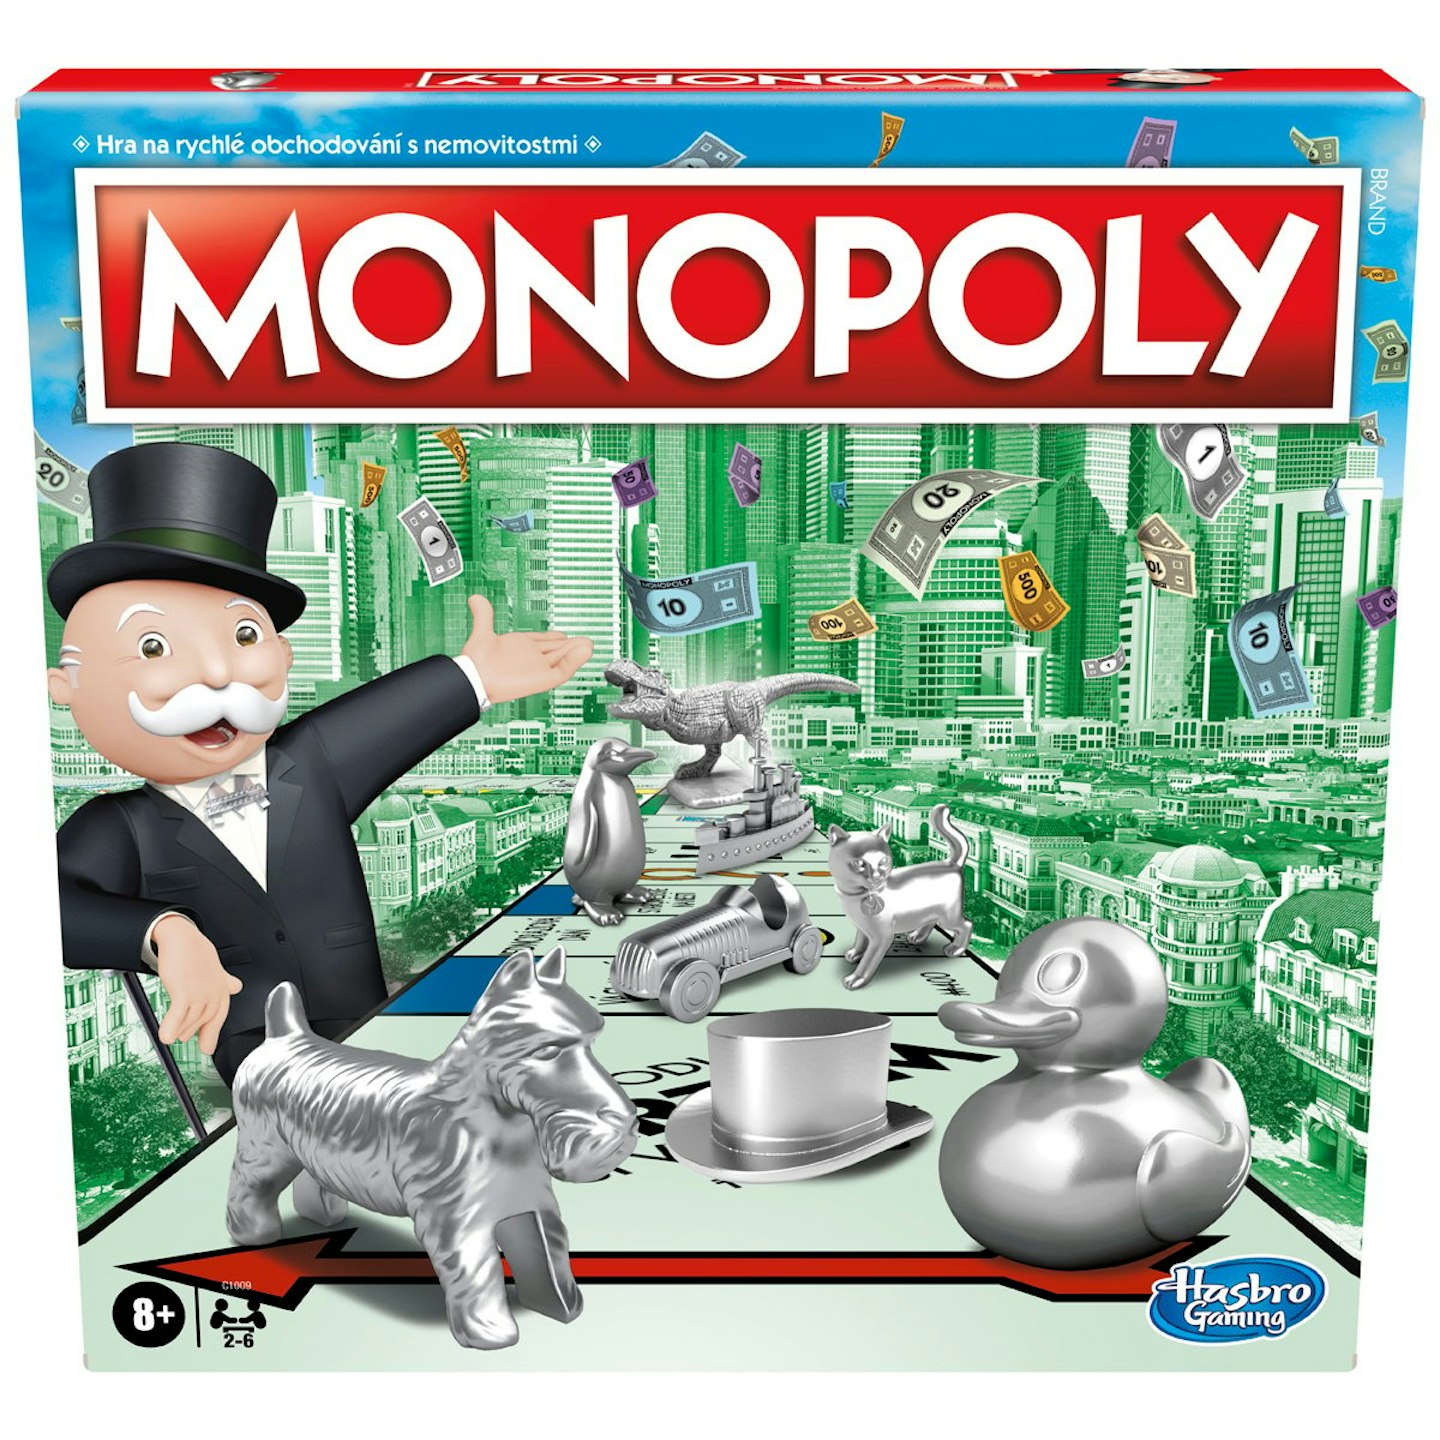 Monopoly classic board game